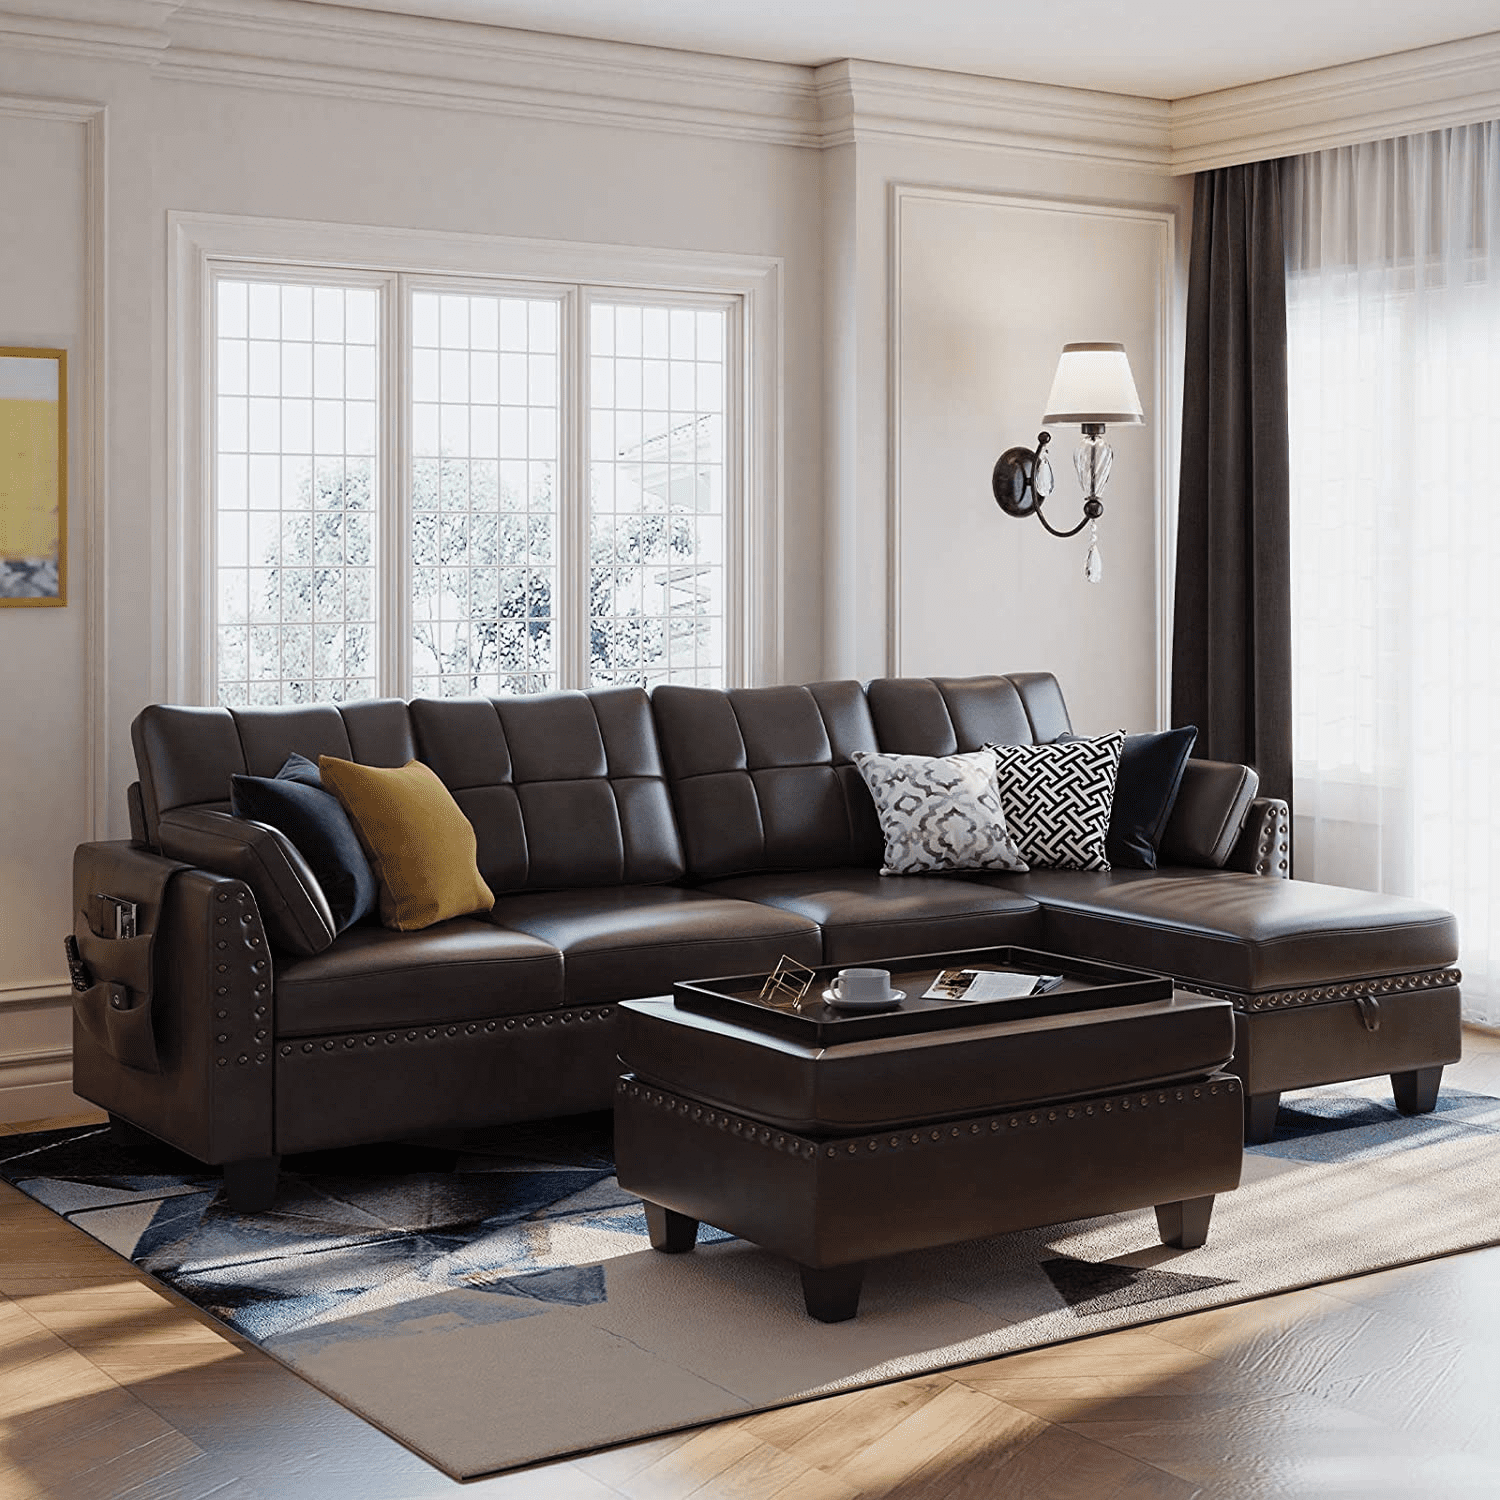 Honbay Faux Leather Sectional Sofa Set L Shaped Couch With Chaise & Ottoman  Brown For Living Room – Walmart In Faux Leather Sectional Sofa Sets (View 2 of 15)